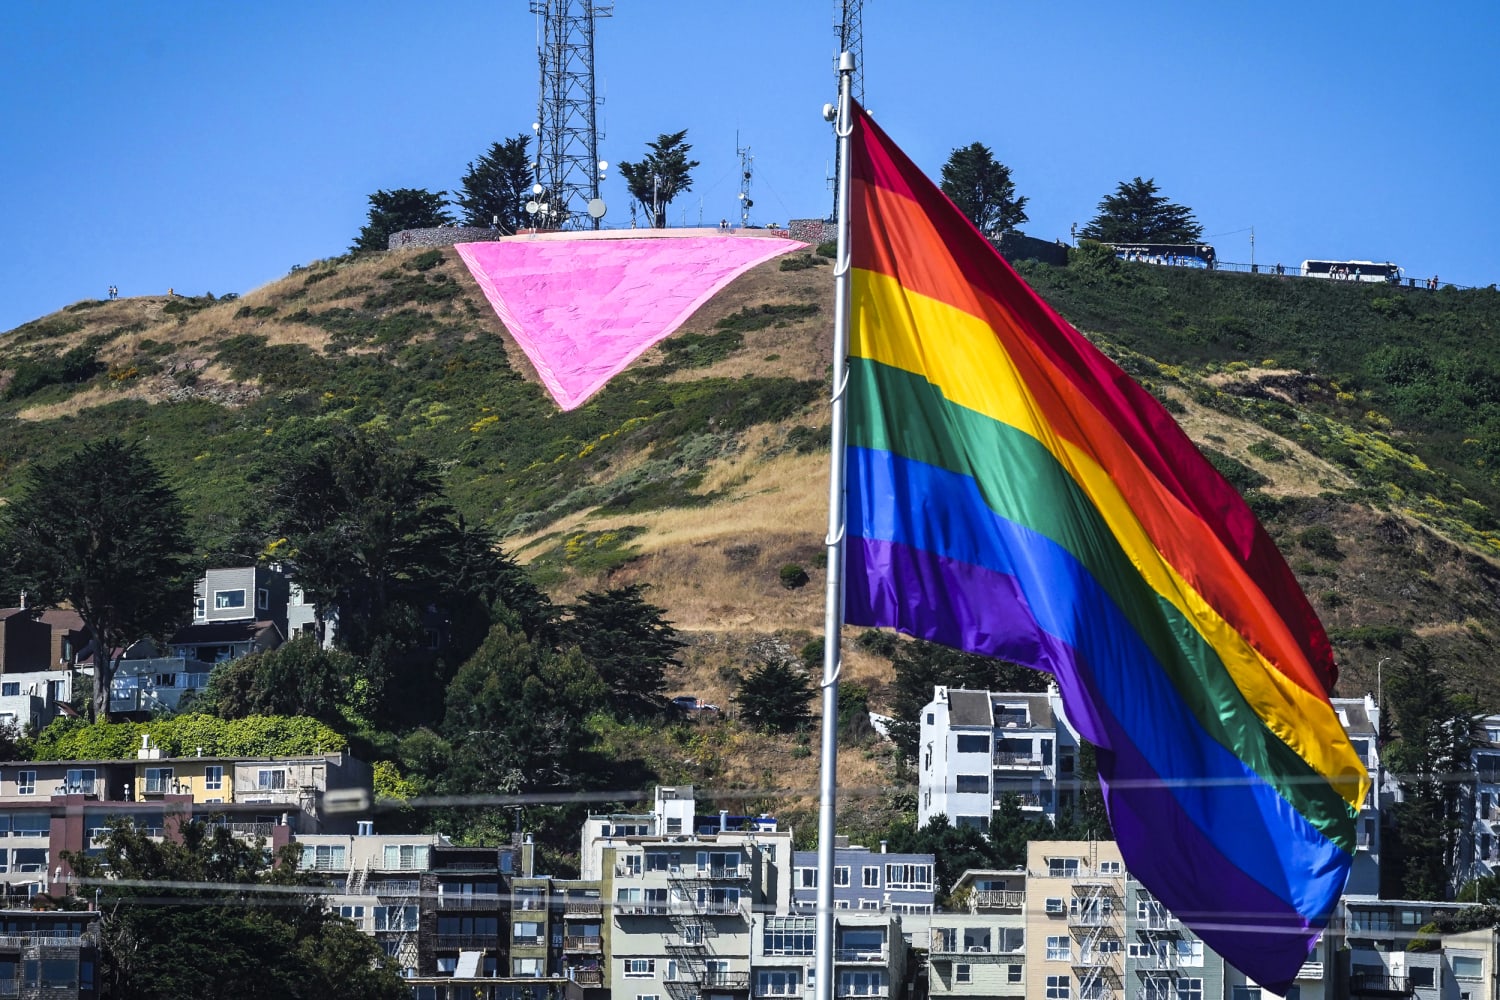 San Francisco displays the largest-ever pink triangle for Pride